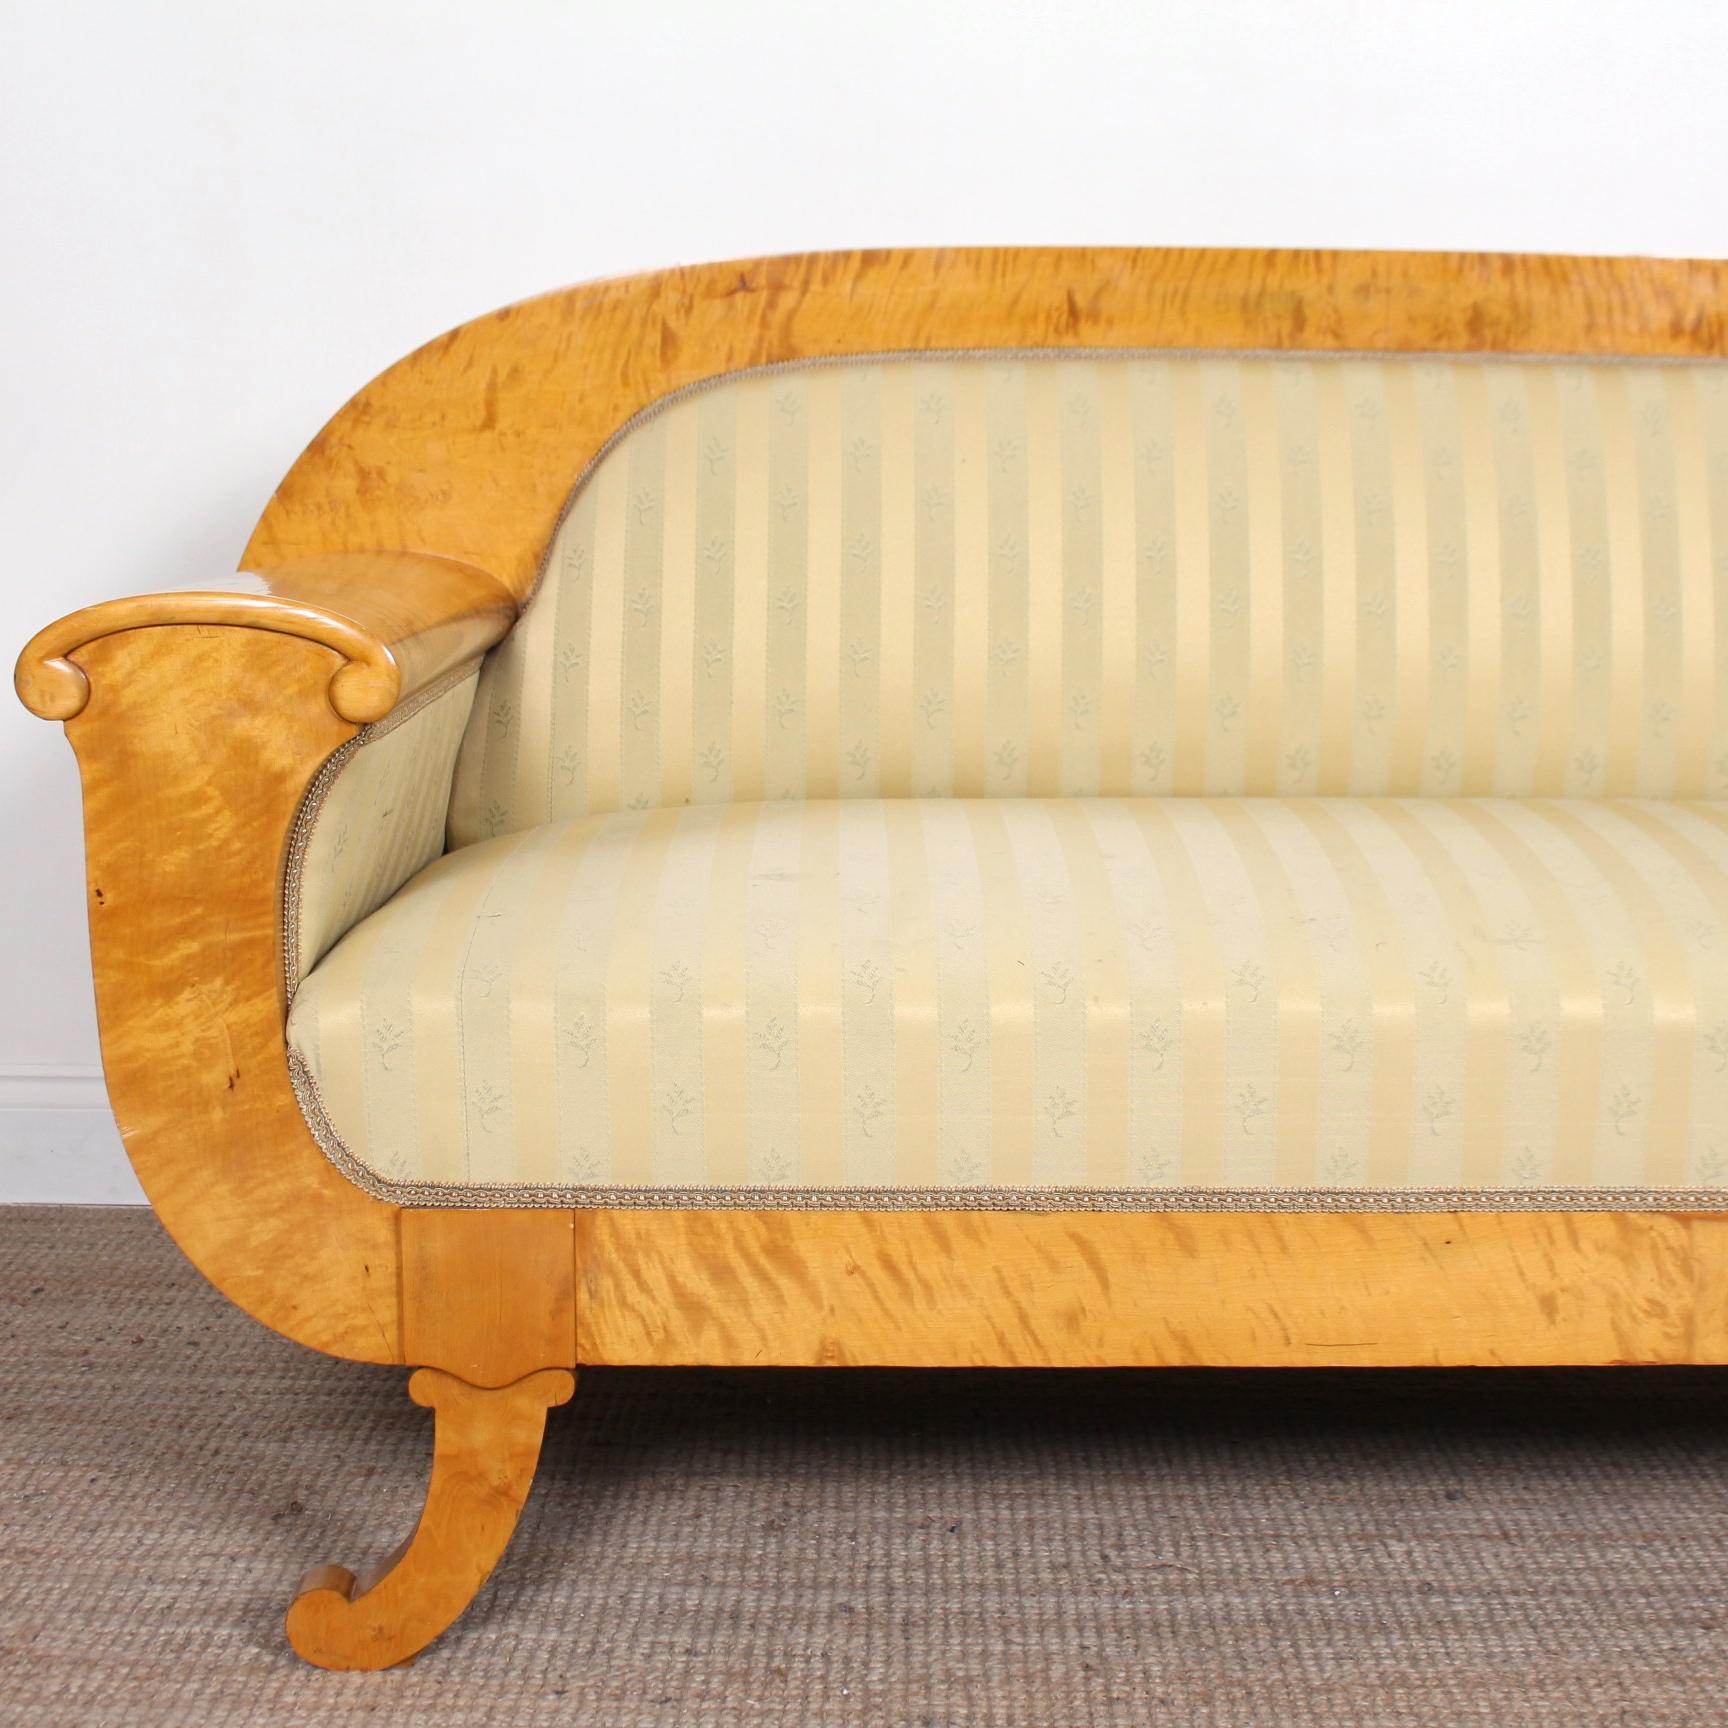 A fine quality satinwood framed Art Deco period sofa.

The burl satinwood marquetry work boasting a magnificent figured grain and vibrant patina.

The arched top and lotus scrolling armrests enclosed an upholstered seat, back and raised on